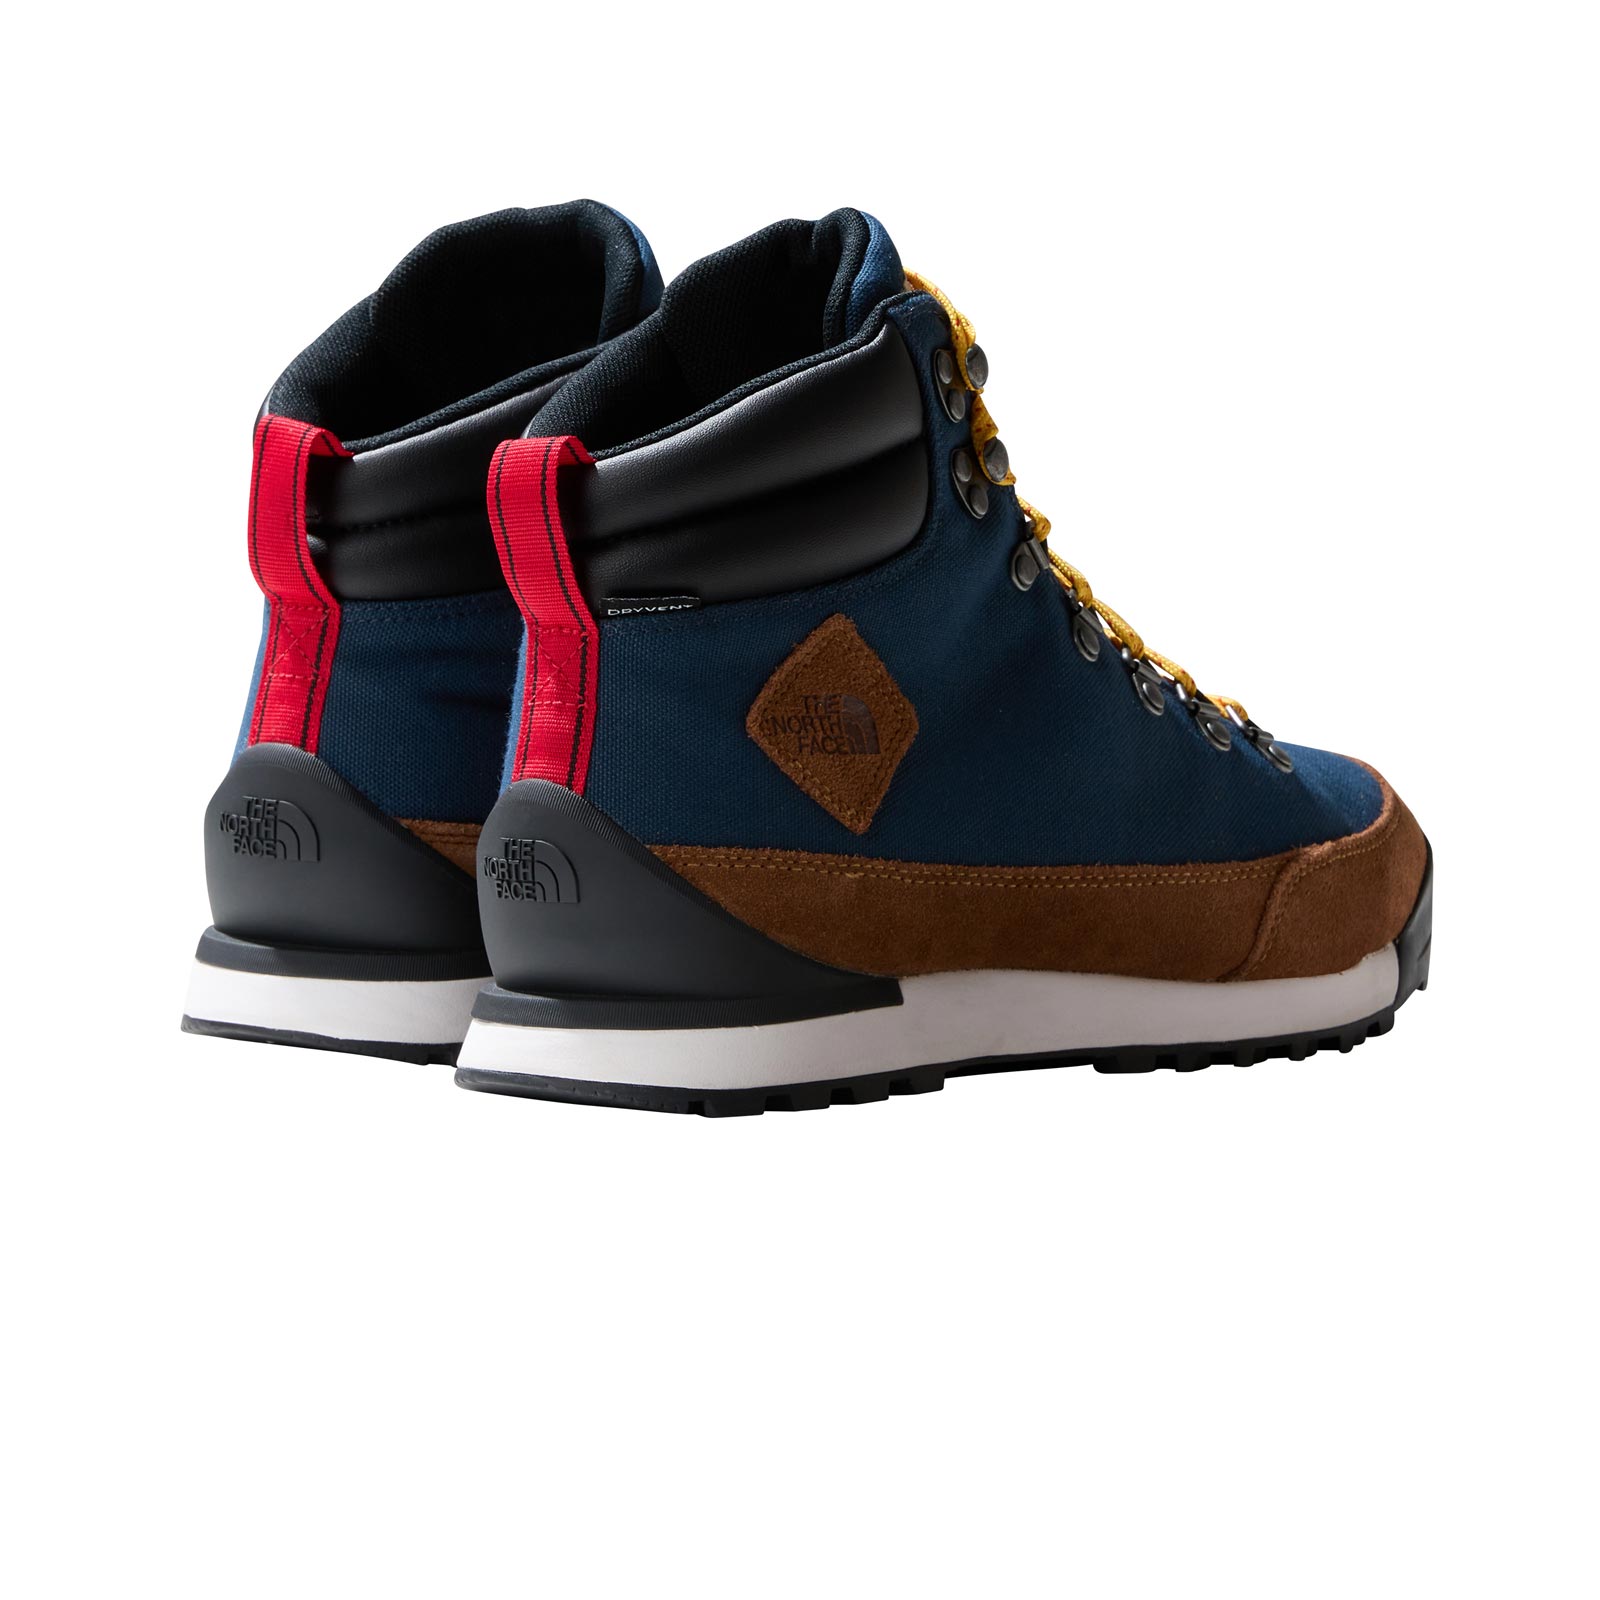 THE NORTH FACE BACK-TO-BERKELEY IV MENS BOOTS